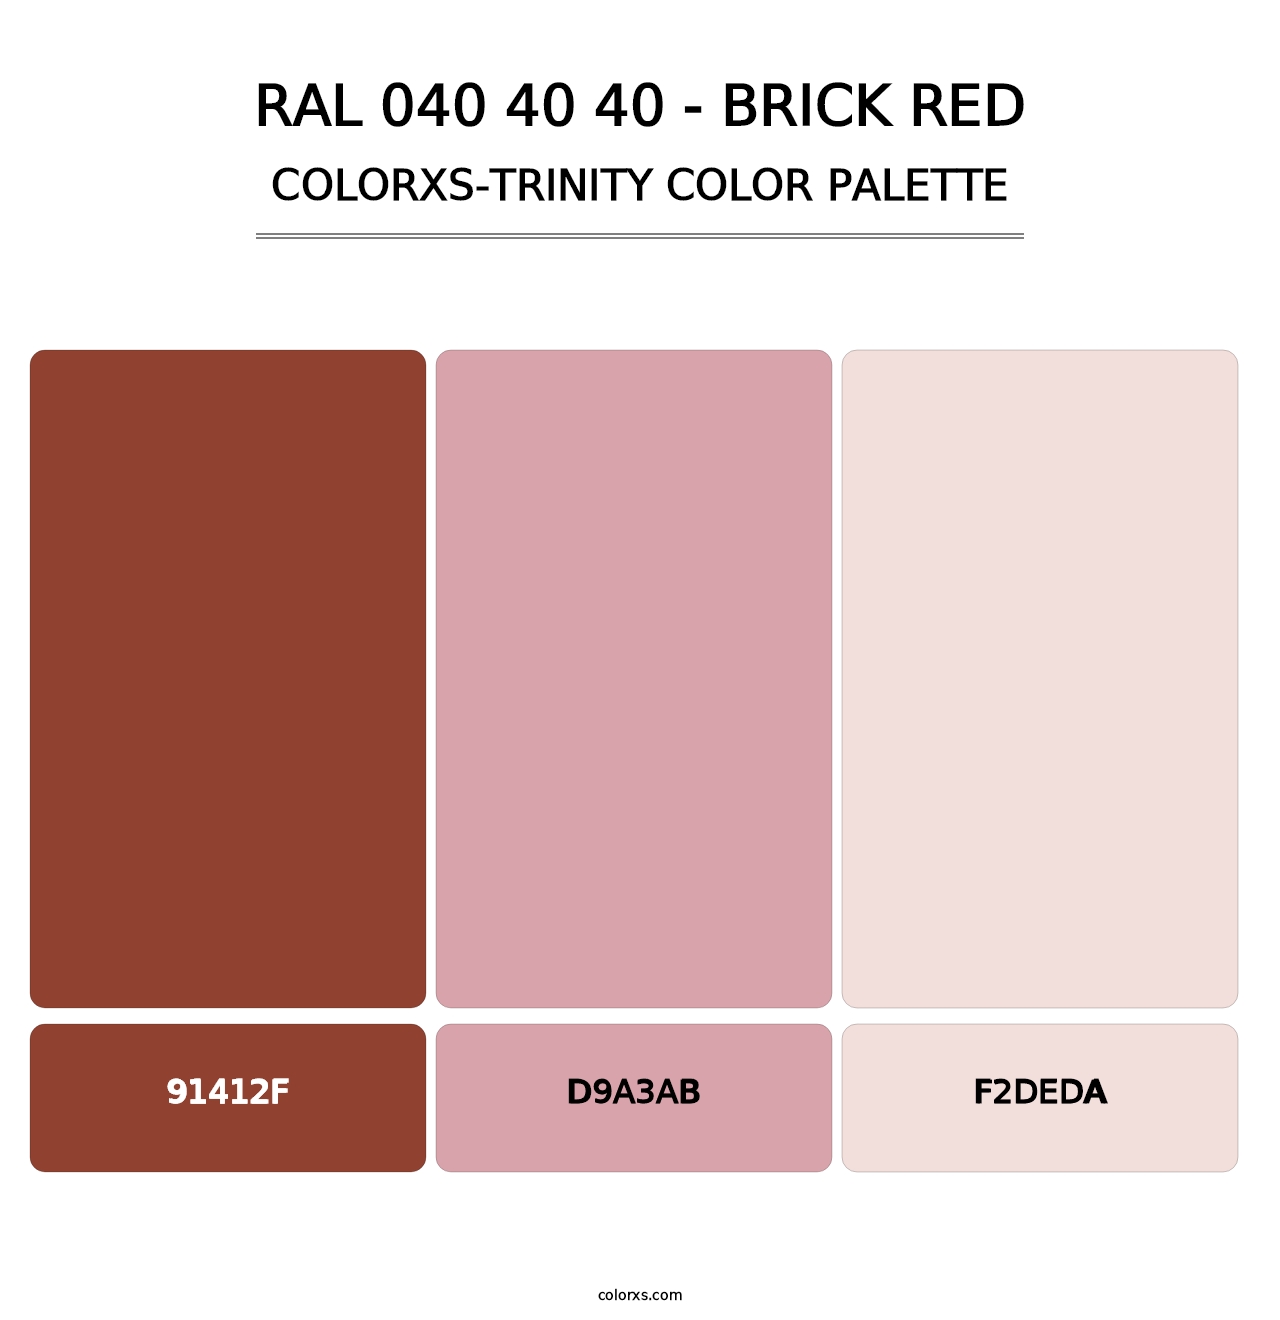 RAL 040 40 40 - Brick Red - Colorxs Trinity Palette